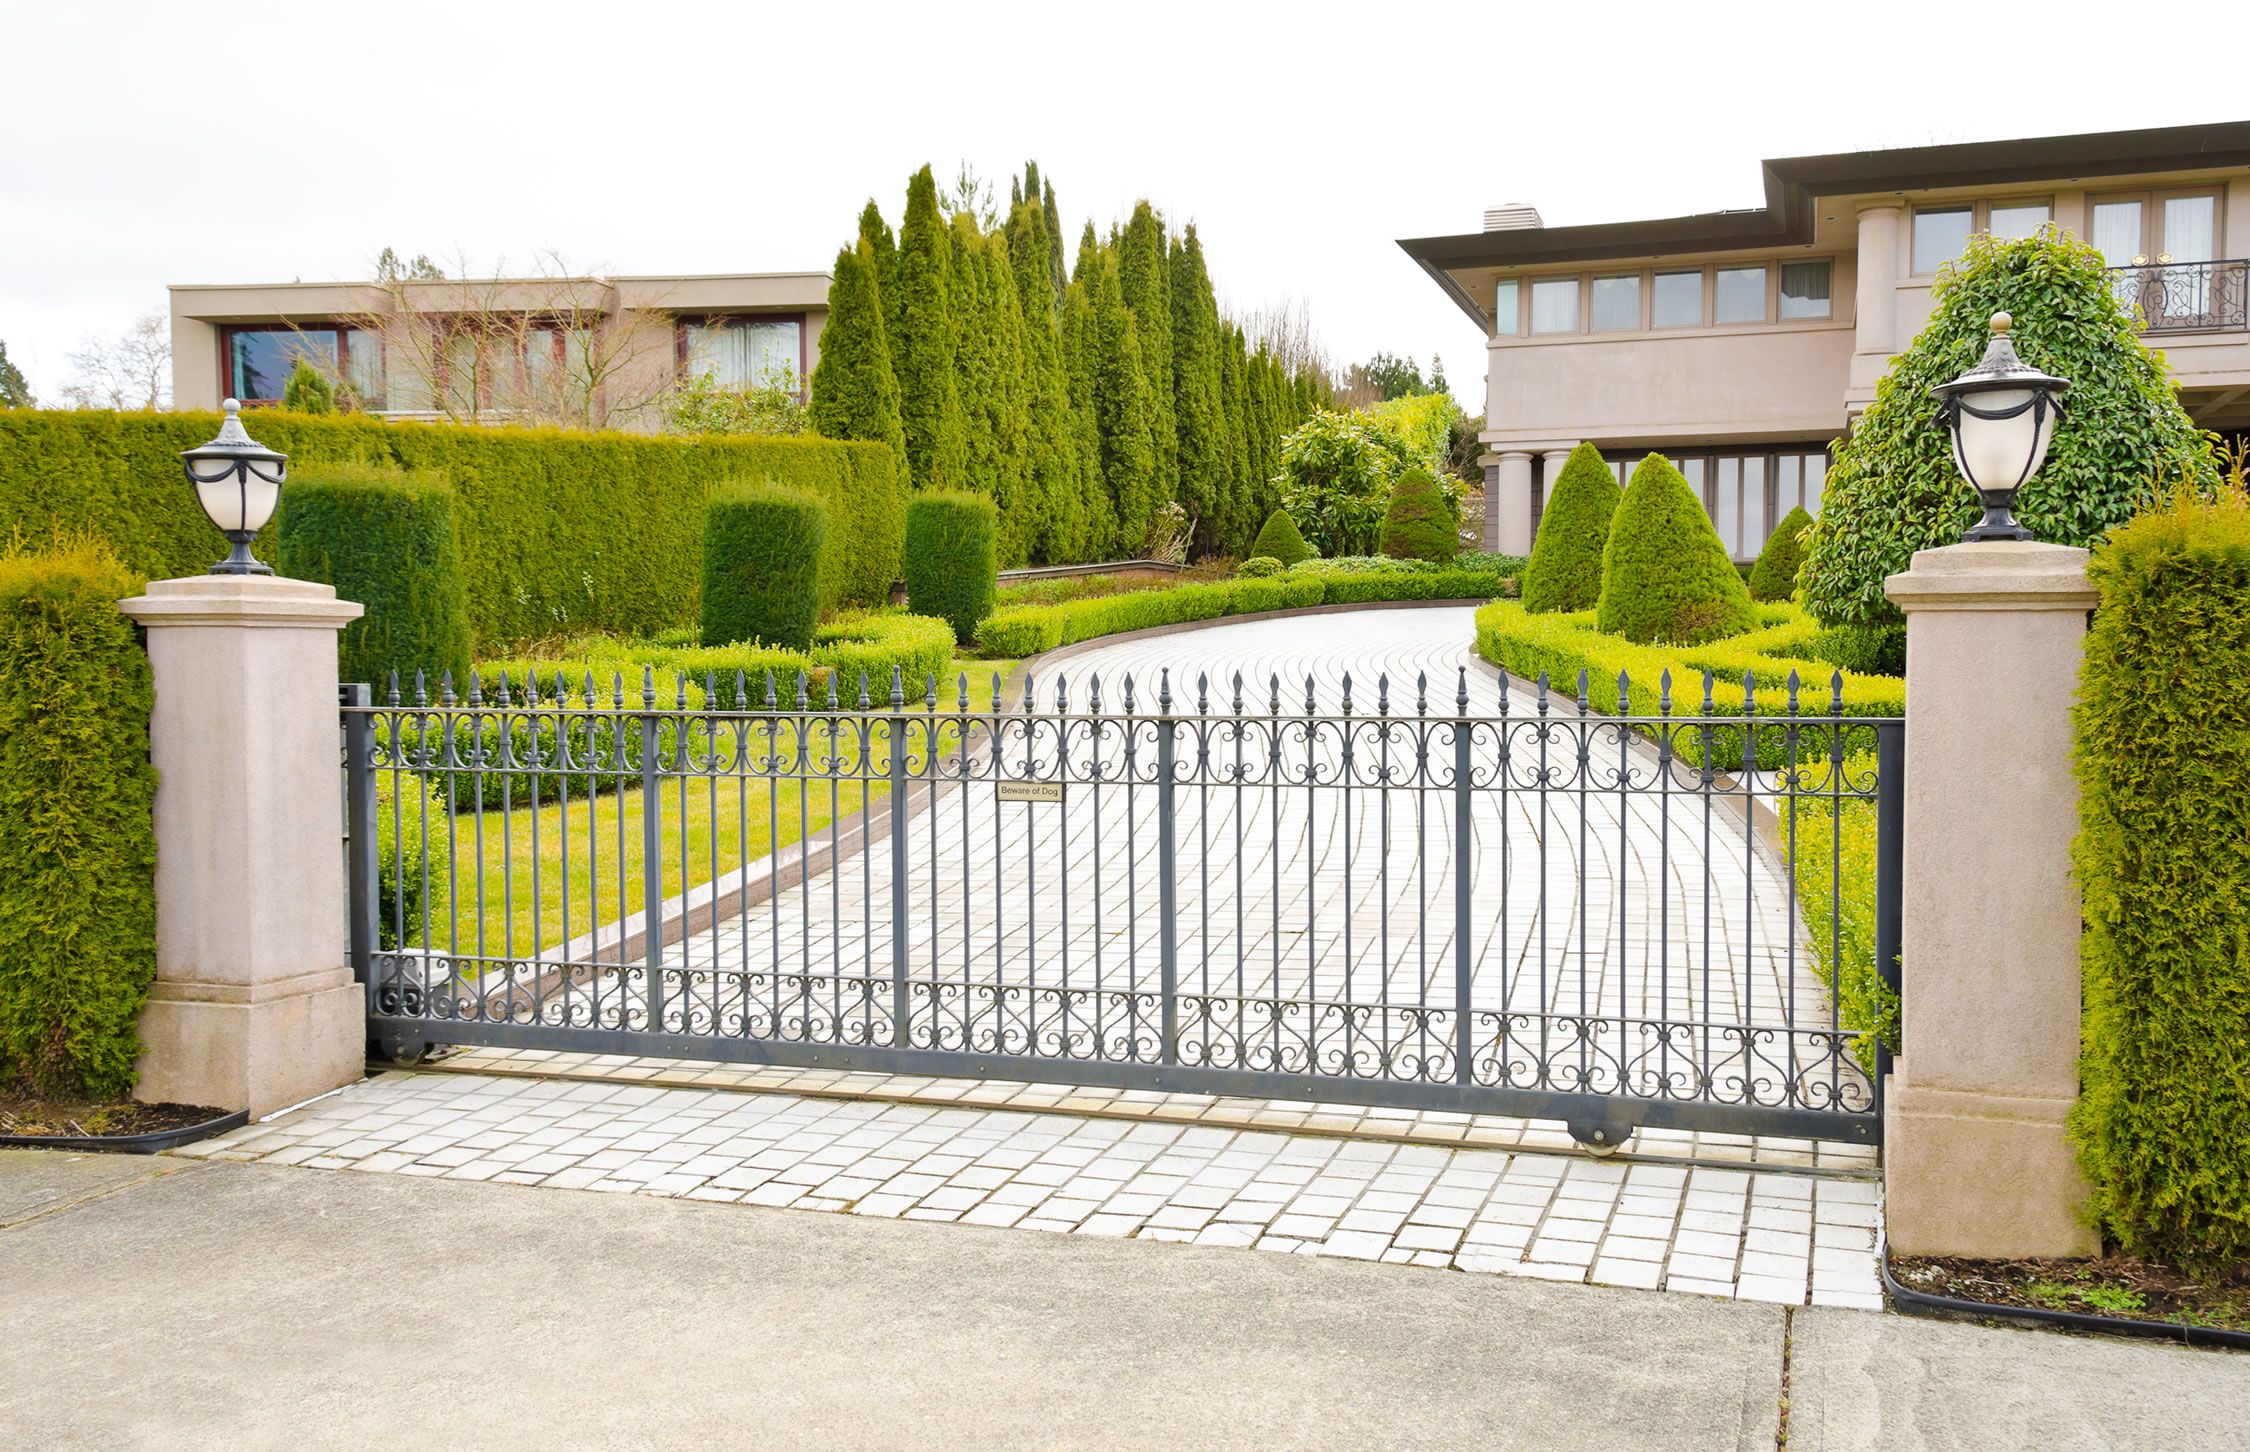 gated entry to mansion with shrubbery lining driveway